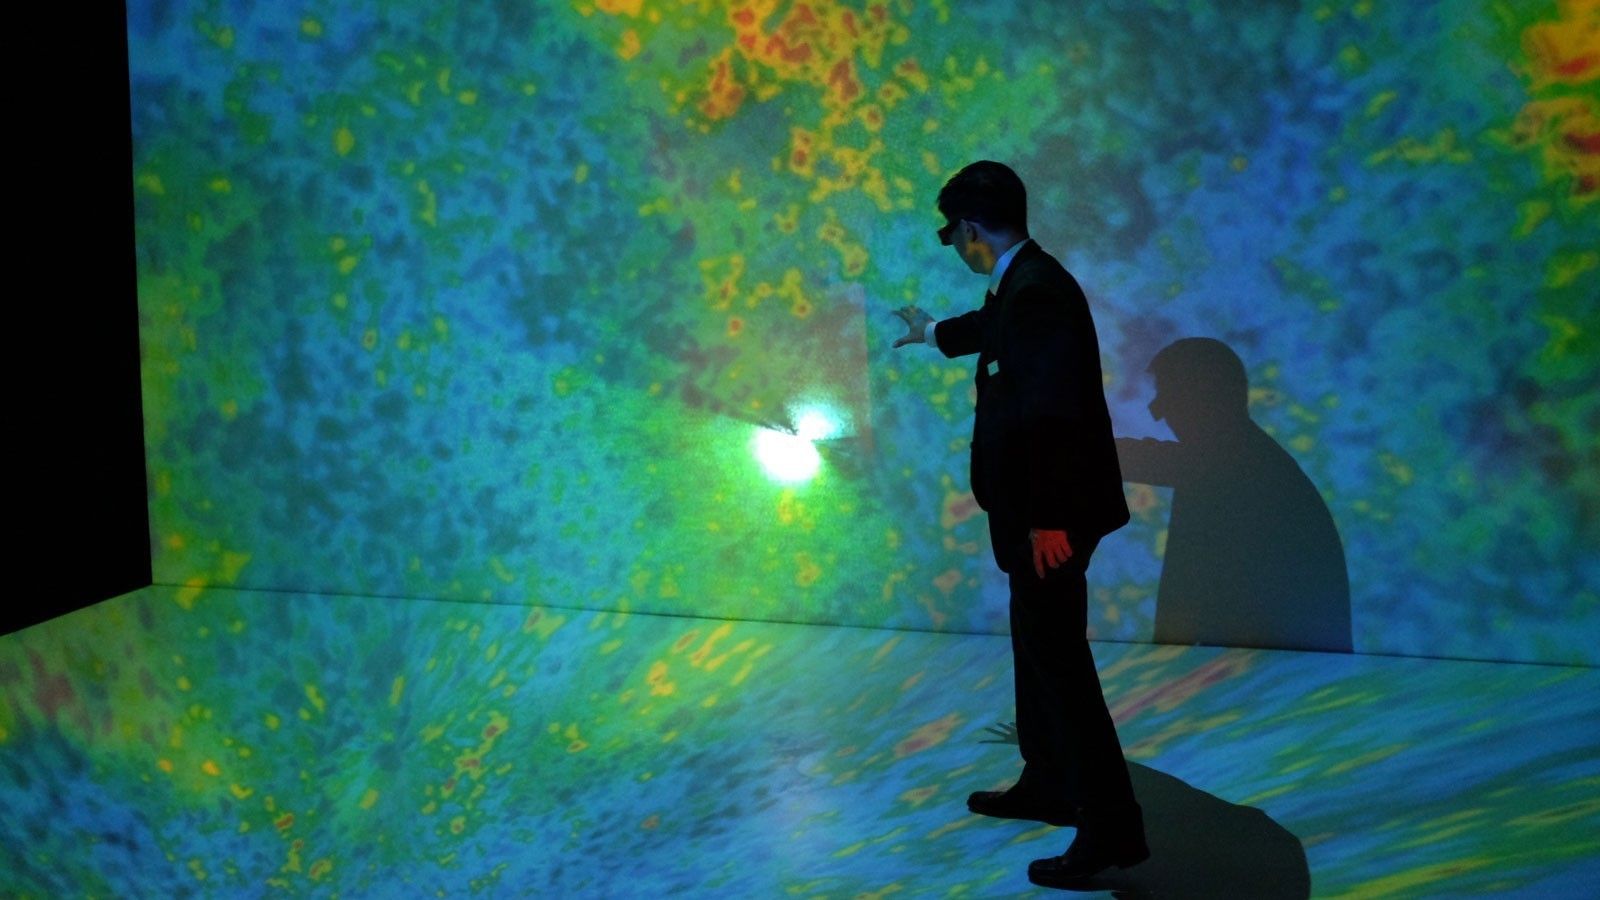 Immersive technologies in Science Centre Singapore